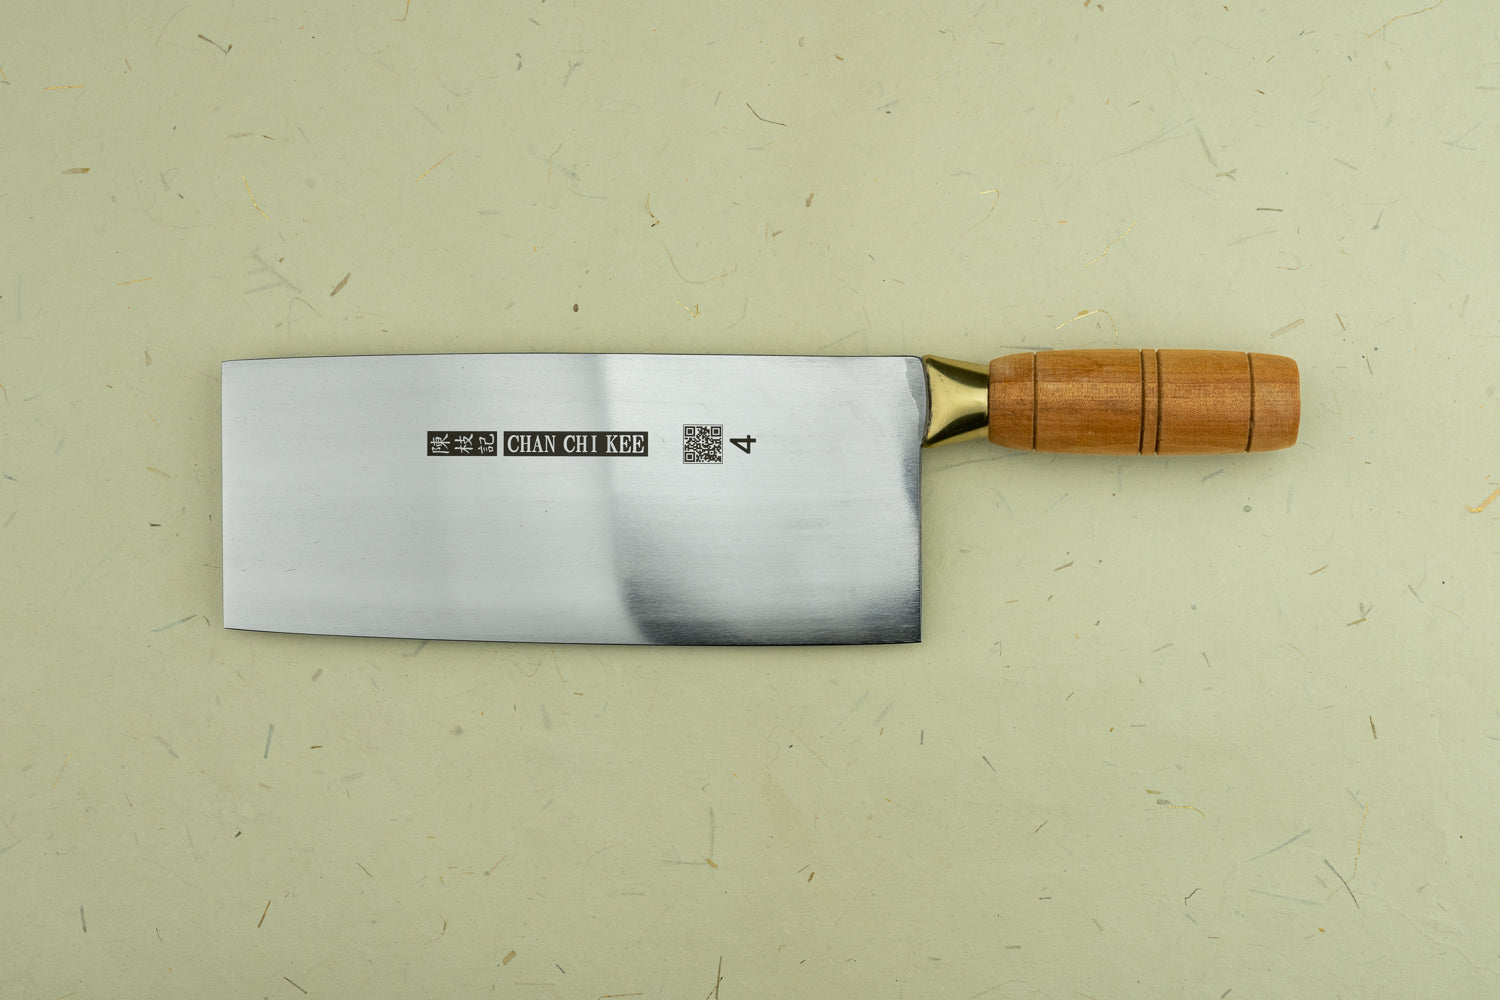 Sugimoto Number 30 CM Stainless Steel Chinese Cleaver 190mm